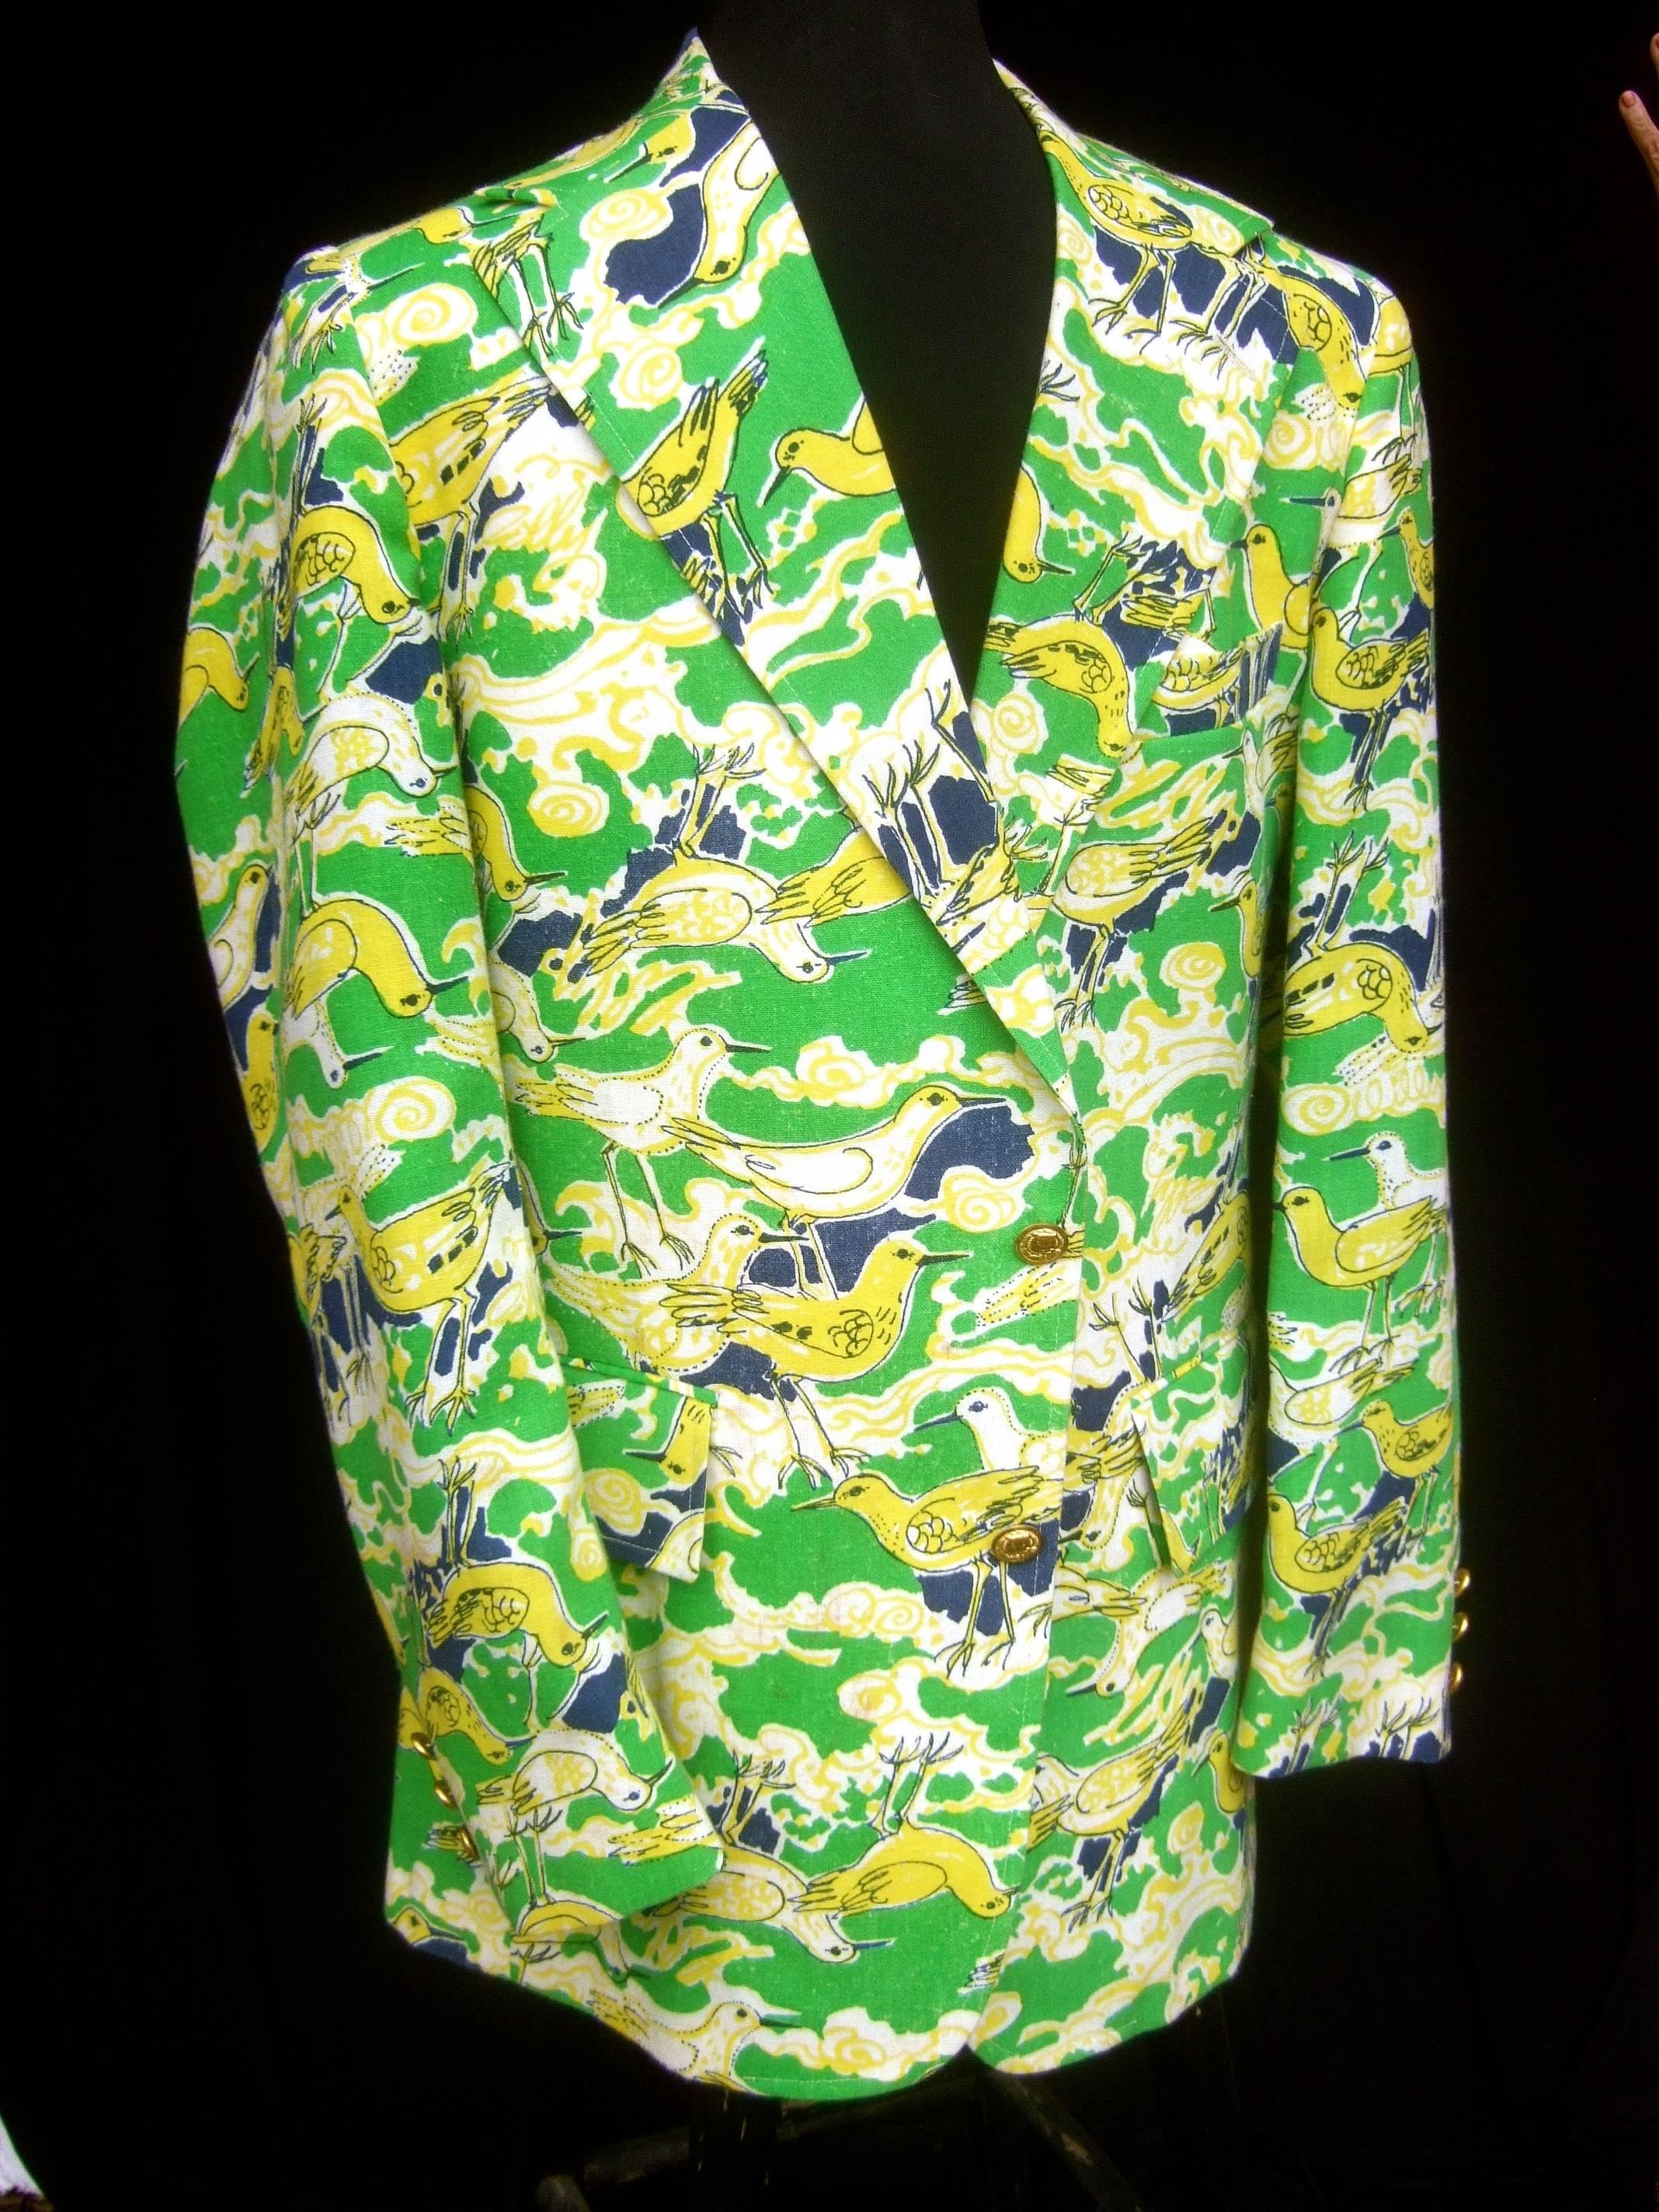 Lilly Pulitzer Men's whimsical seagull print jacket ca 1970
The resort style jacket is illustrated with flocks 
of seagulls surrounded with a vibrant green 
and electric yellow background

Lilly's script name is concealed within the vibrant
print